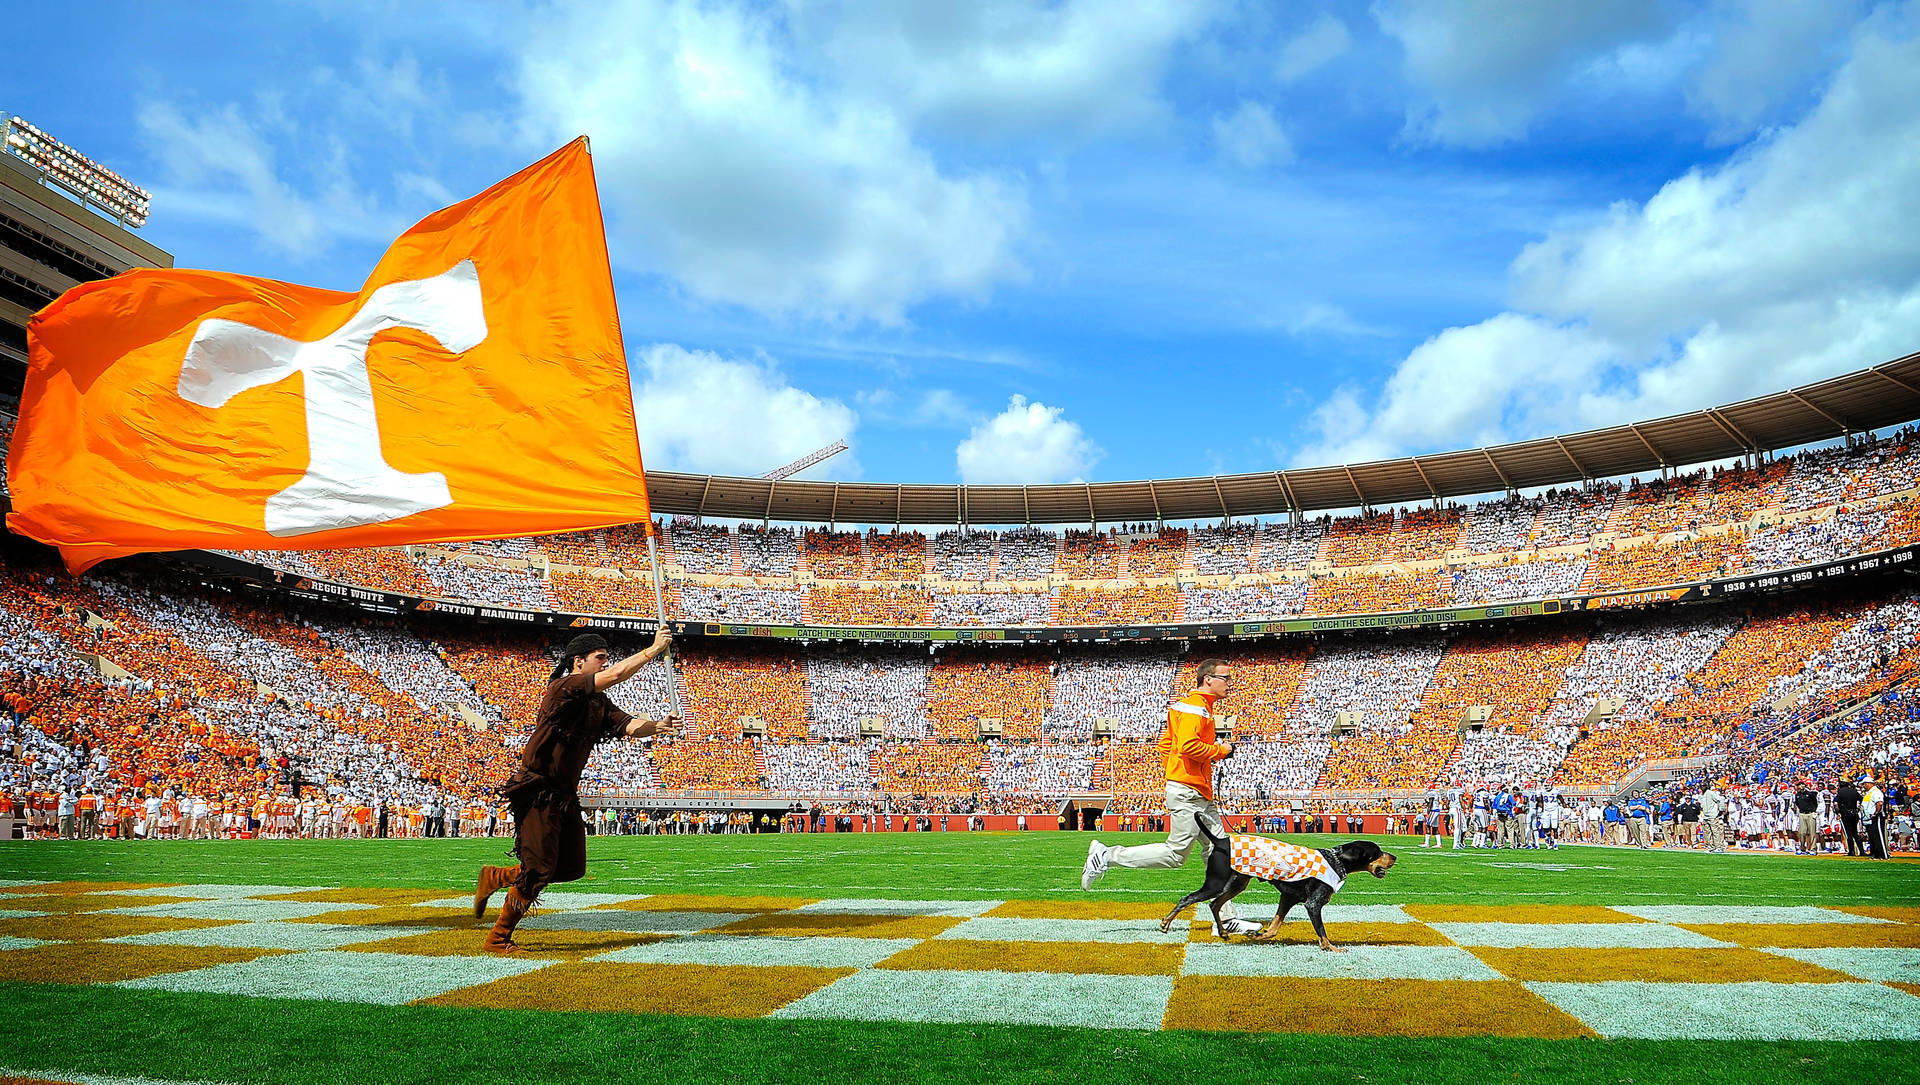 University Of Tennessee Flag In Stadium Background